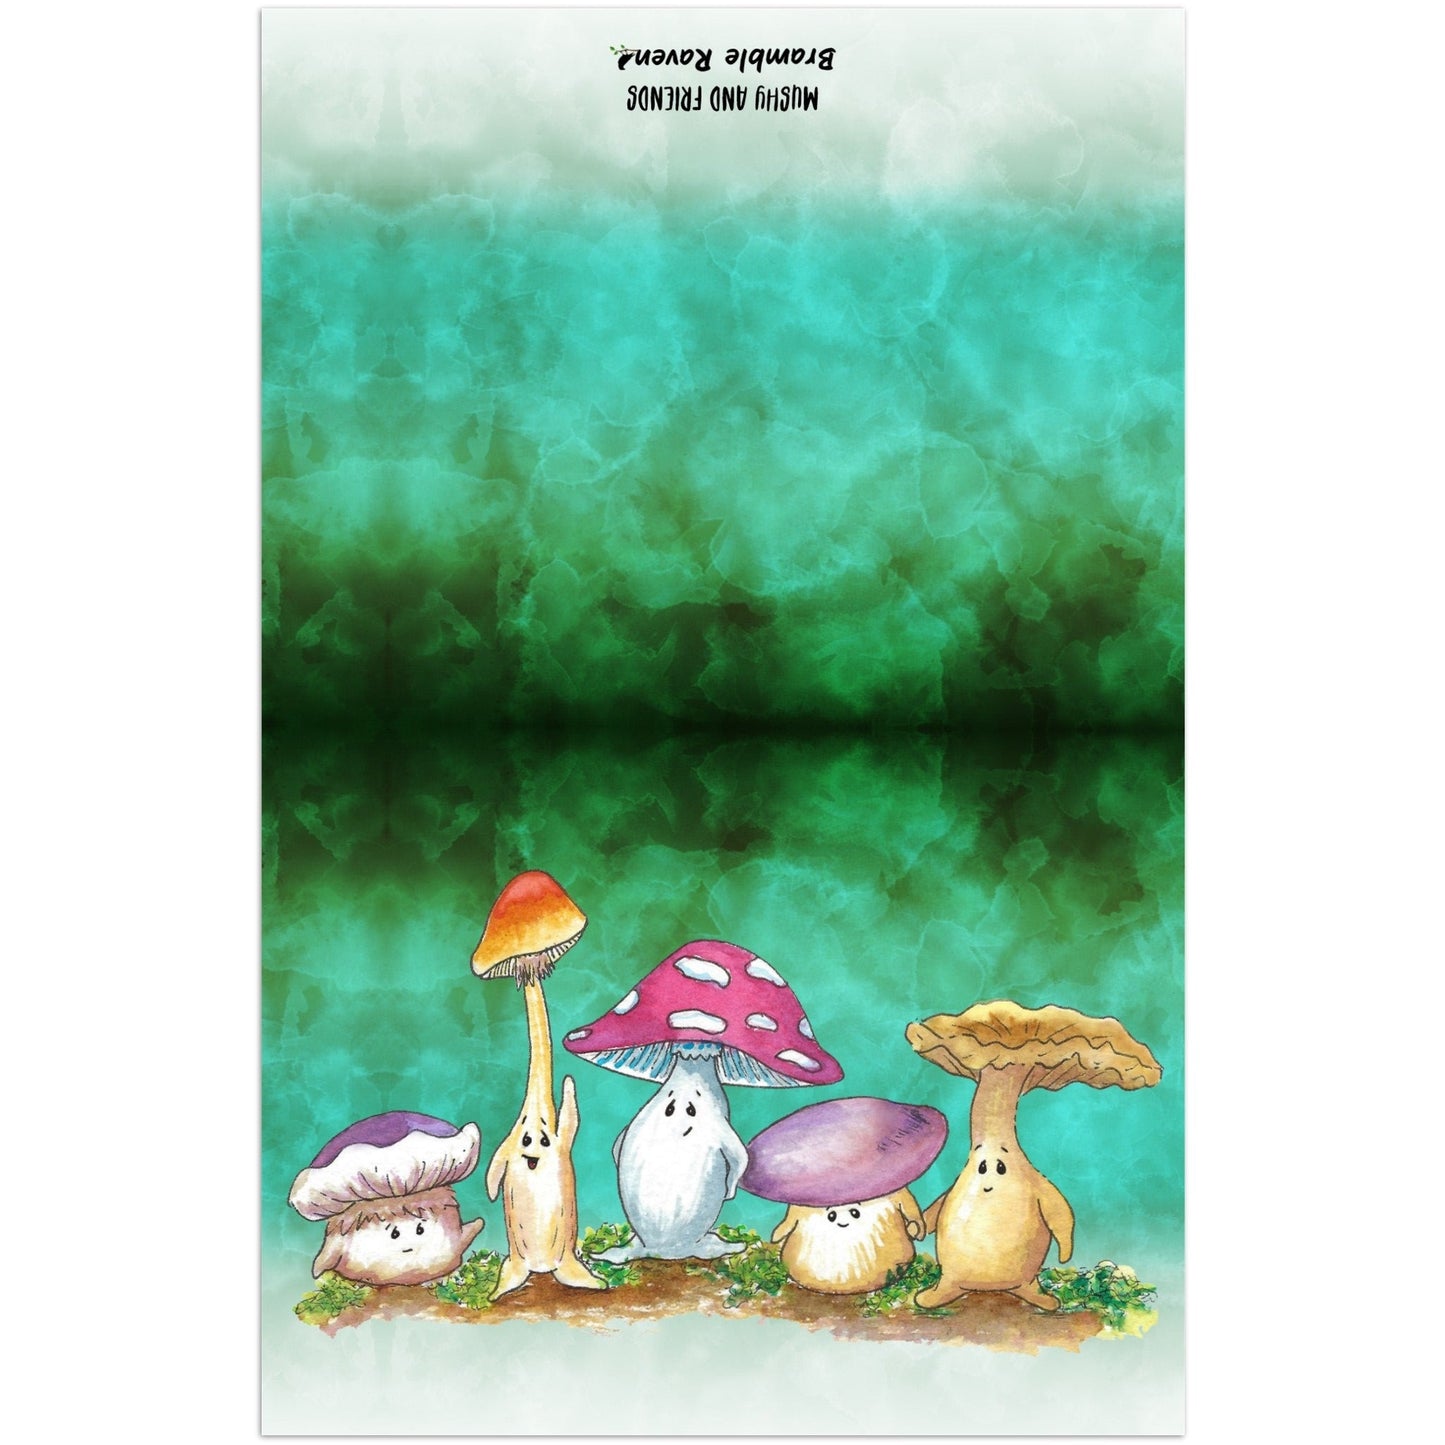 A pack of ten greeting cards and envelopes.  Each card is 4.25  by 5.5 inches. The front features Mushy and his whimsical mushroom friends on a green gradient background. The inside has a slim green border and plenty of room for your message.